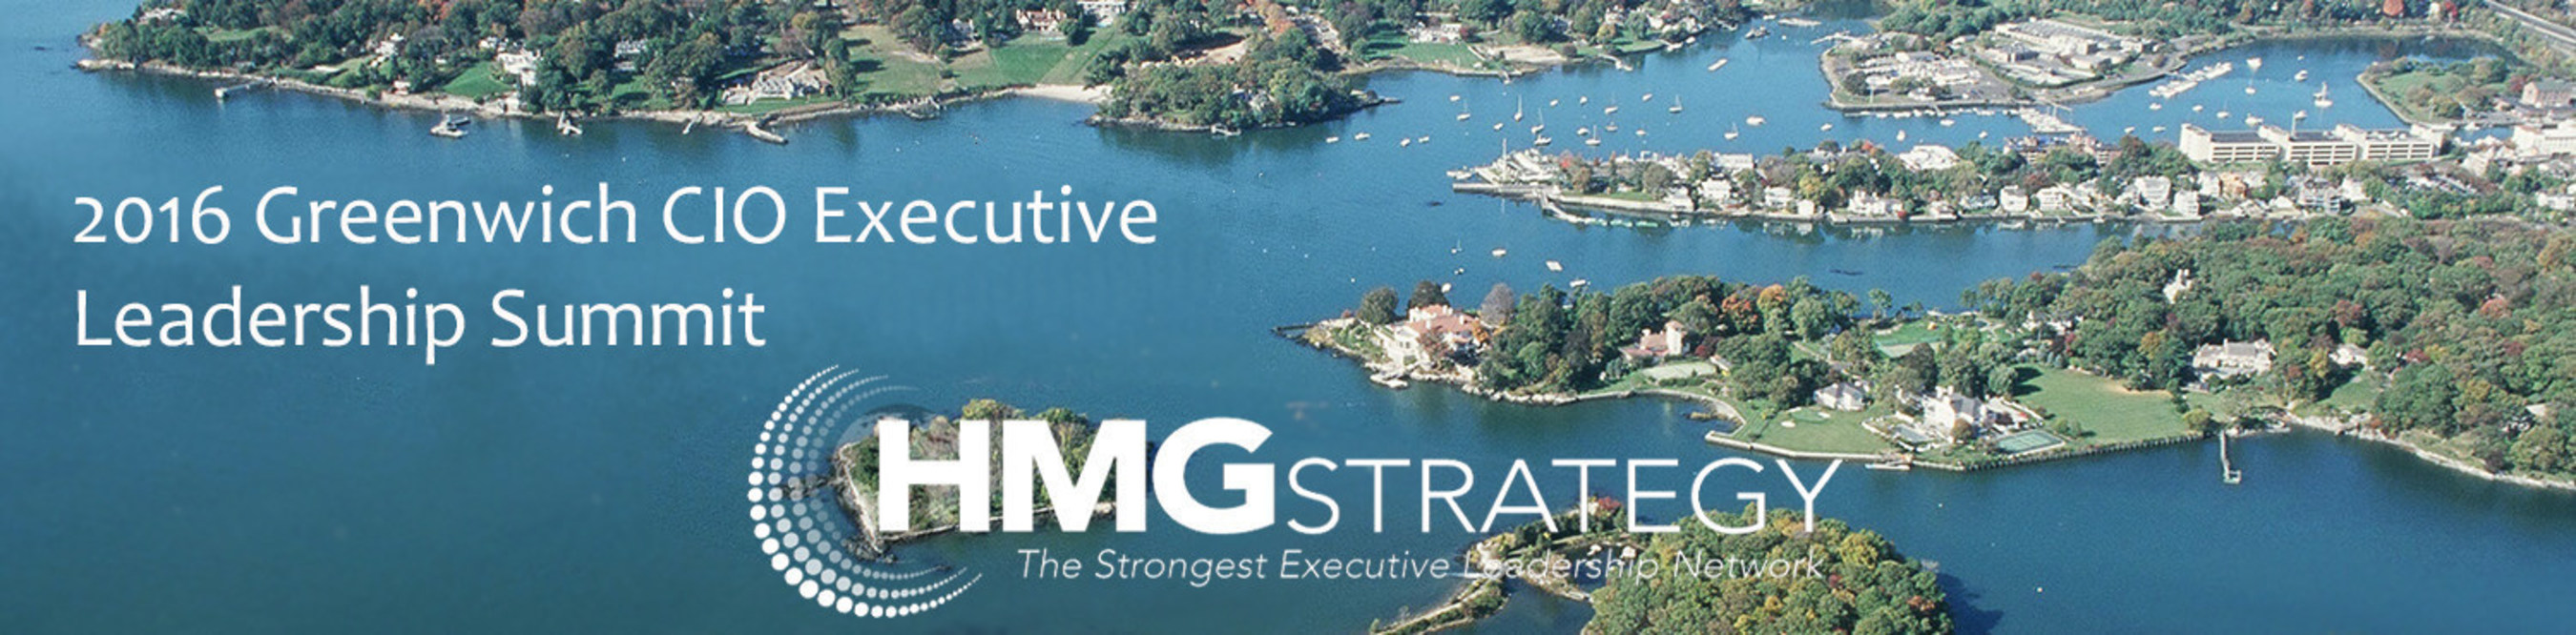 Register Today for the 2016 Greenwich CIO Executive Leadership Summit!